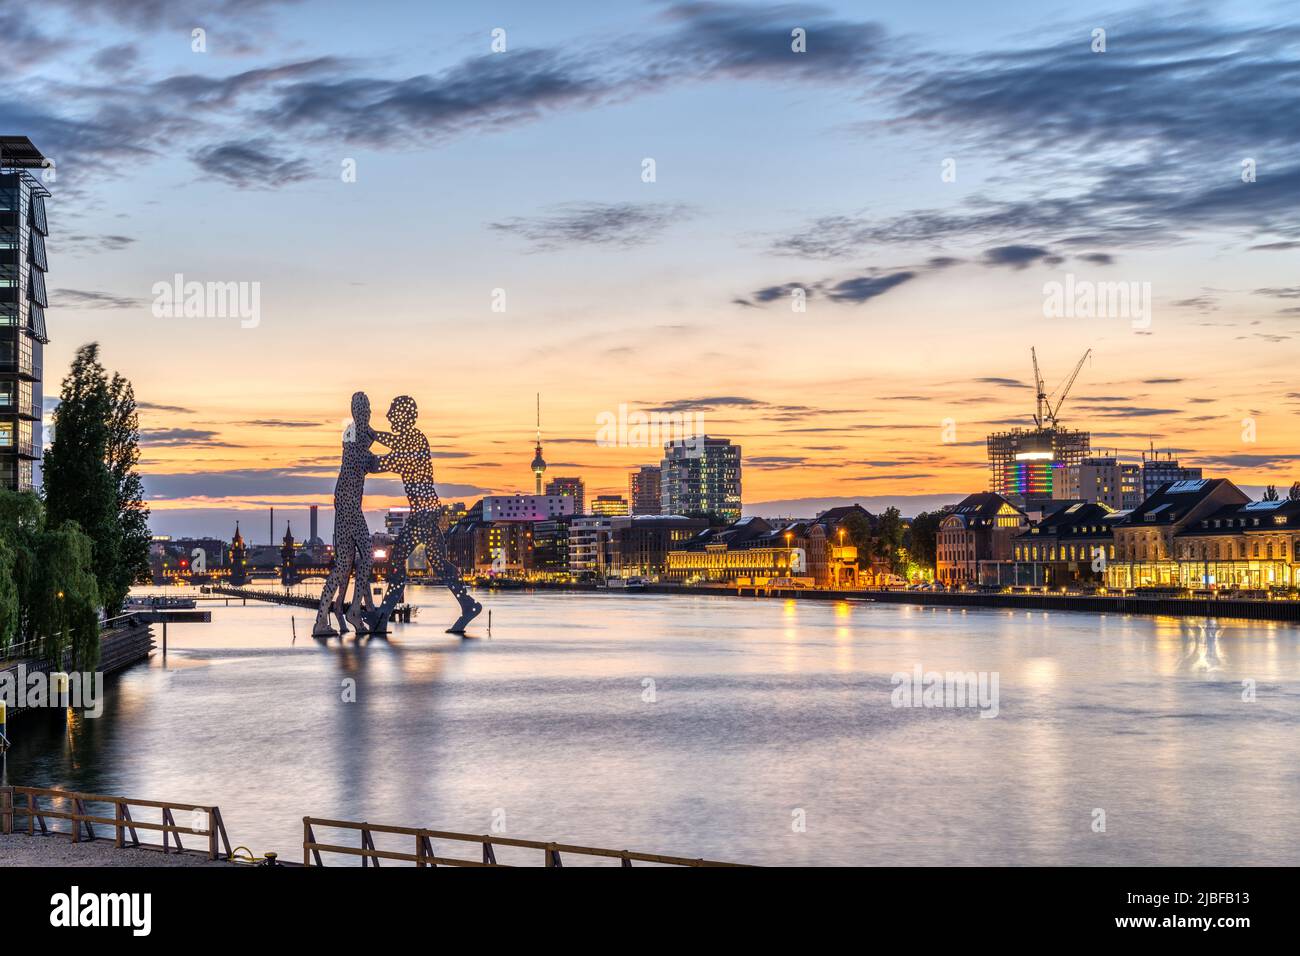 The river Spree in Berlin with the famous TV Tower in the distance after sunset Stock Photo